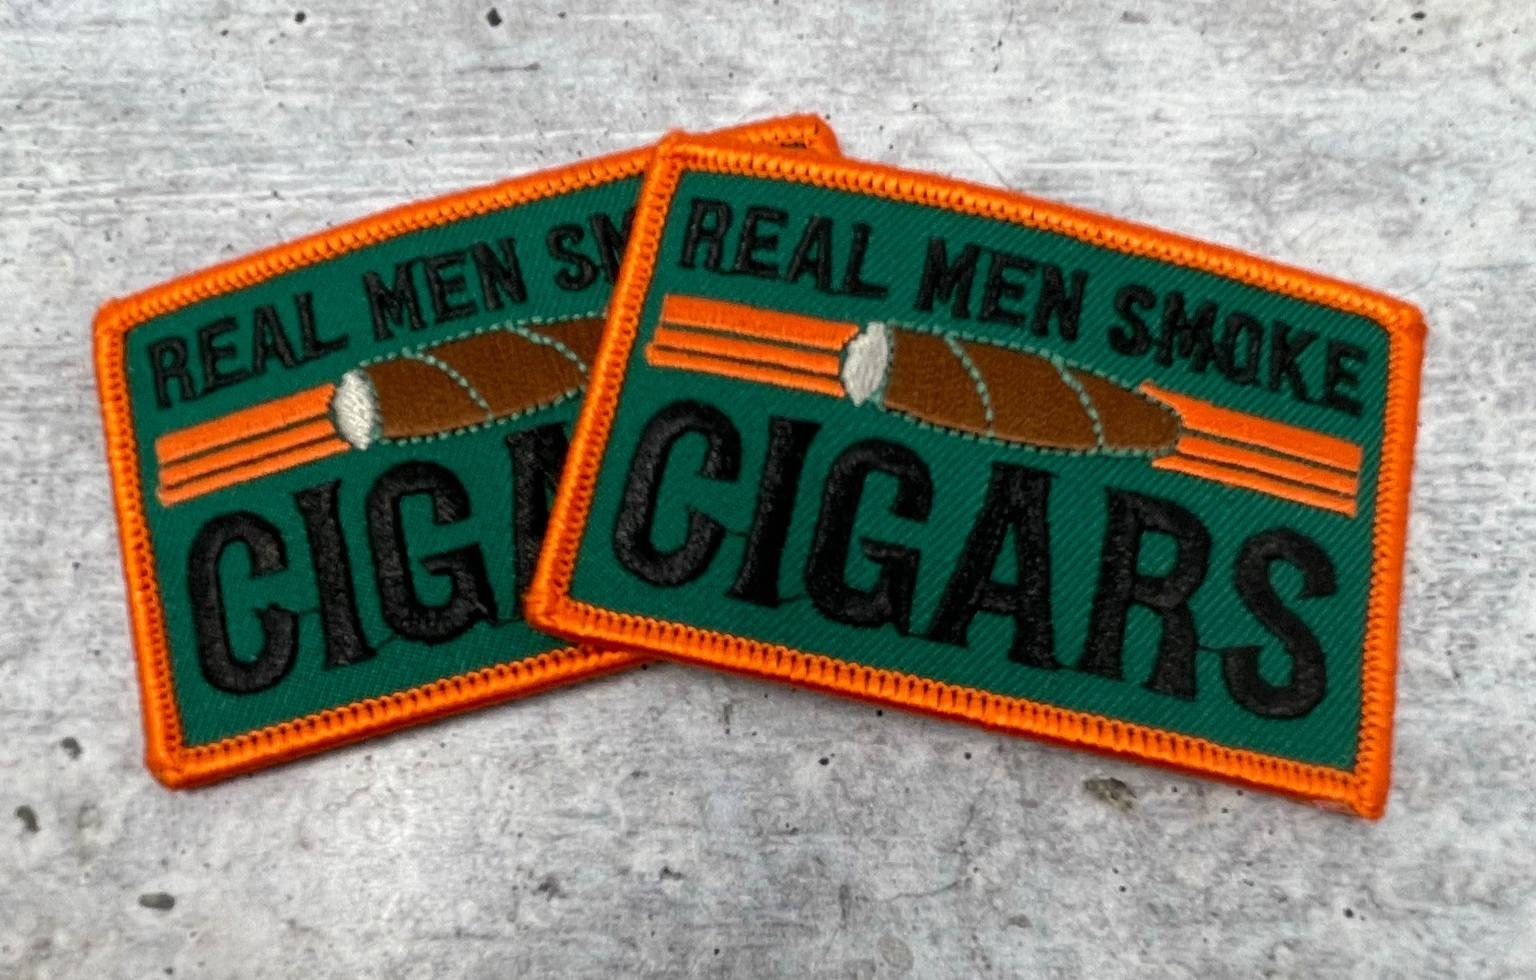 Cigar Lovers,"Real Men Smoke Cigars" 1-pc, Smokers Gift, Cool Embroidered Patch, Green & Orange, Size 3"x2" Iron-on, Patches for Men